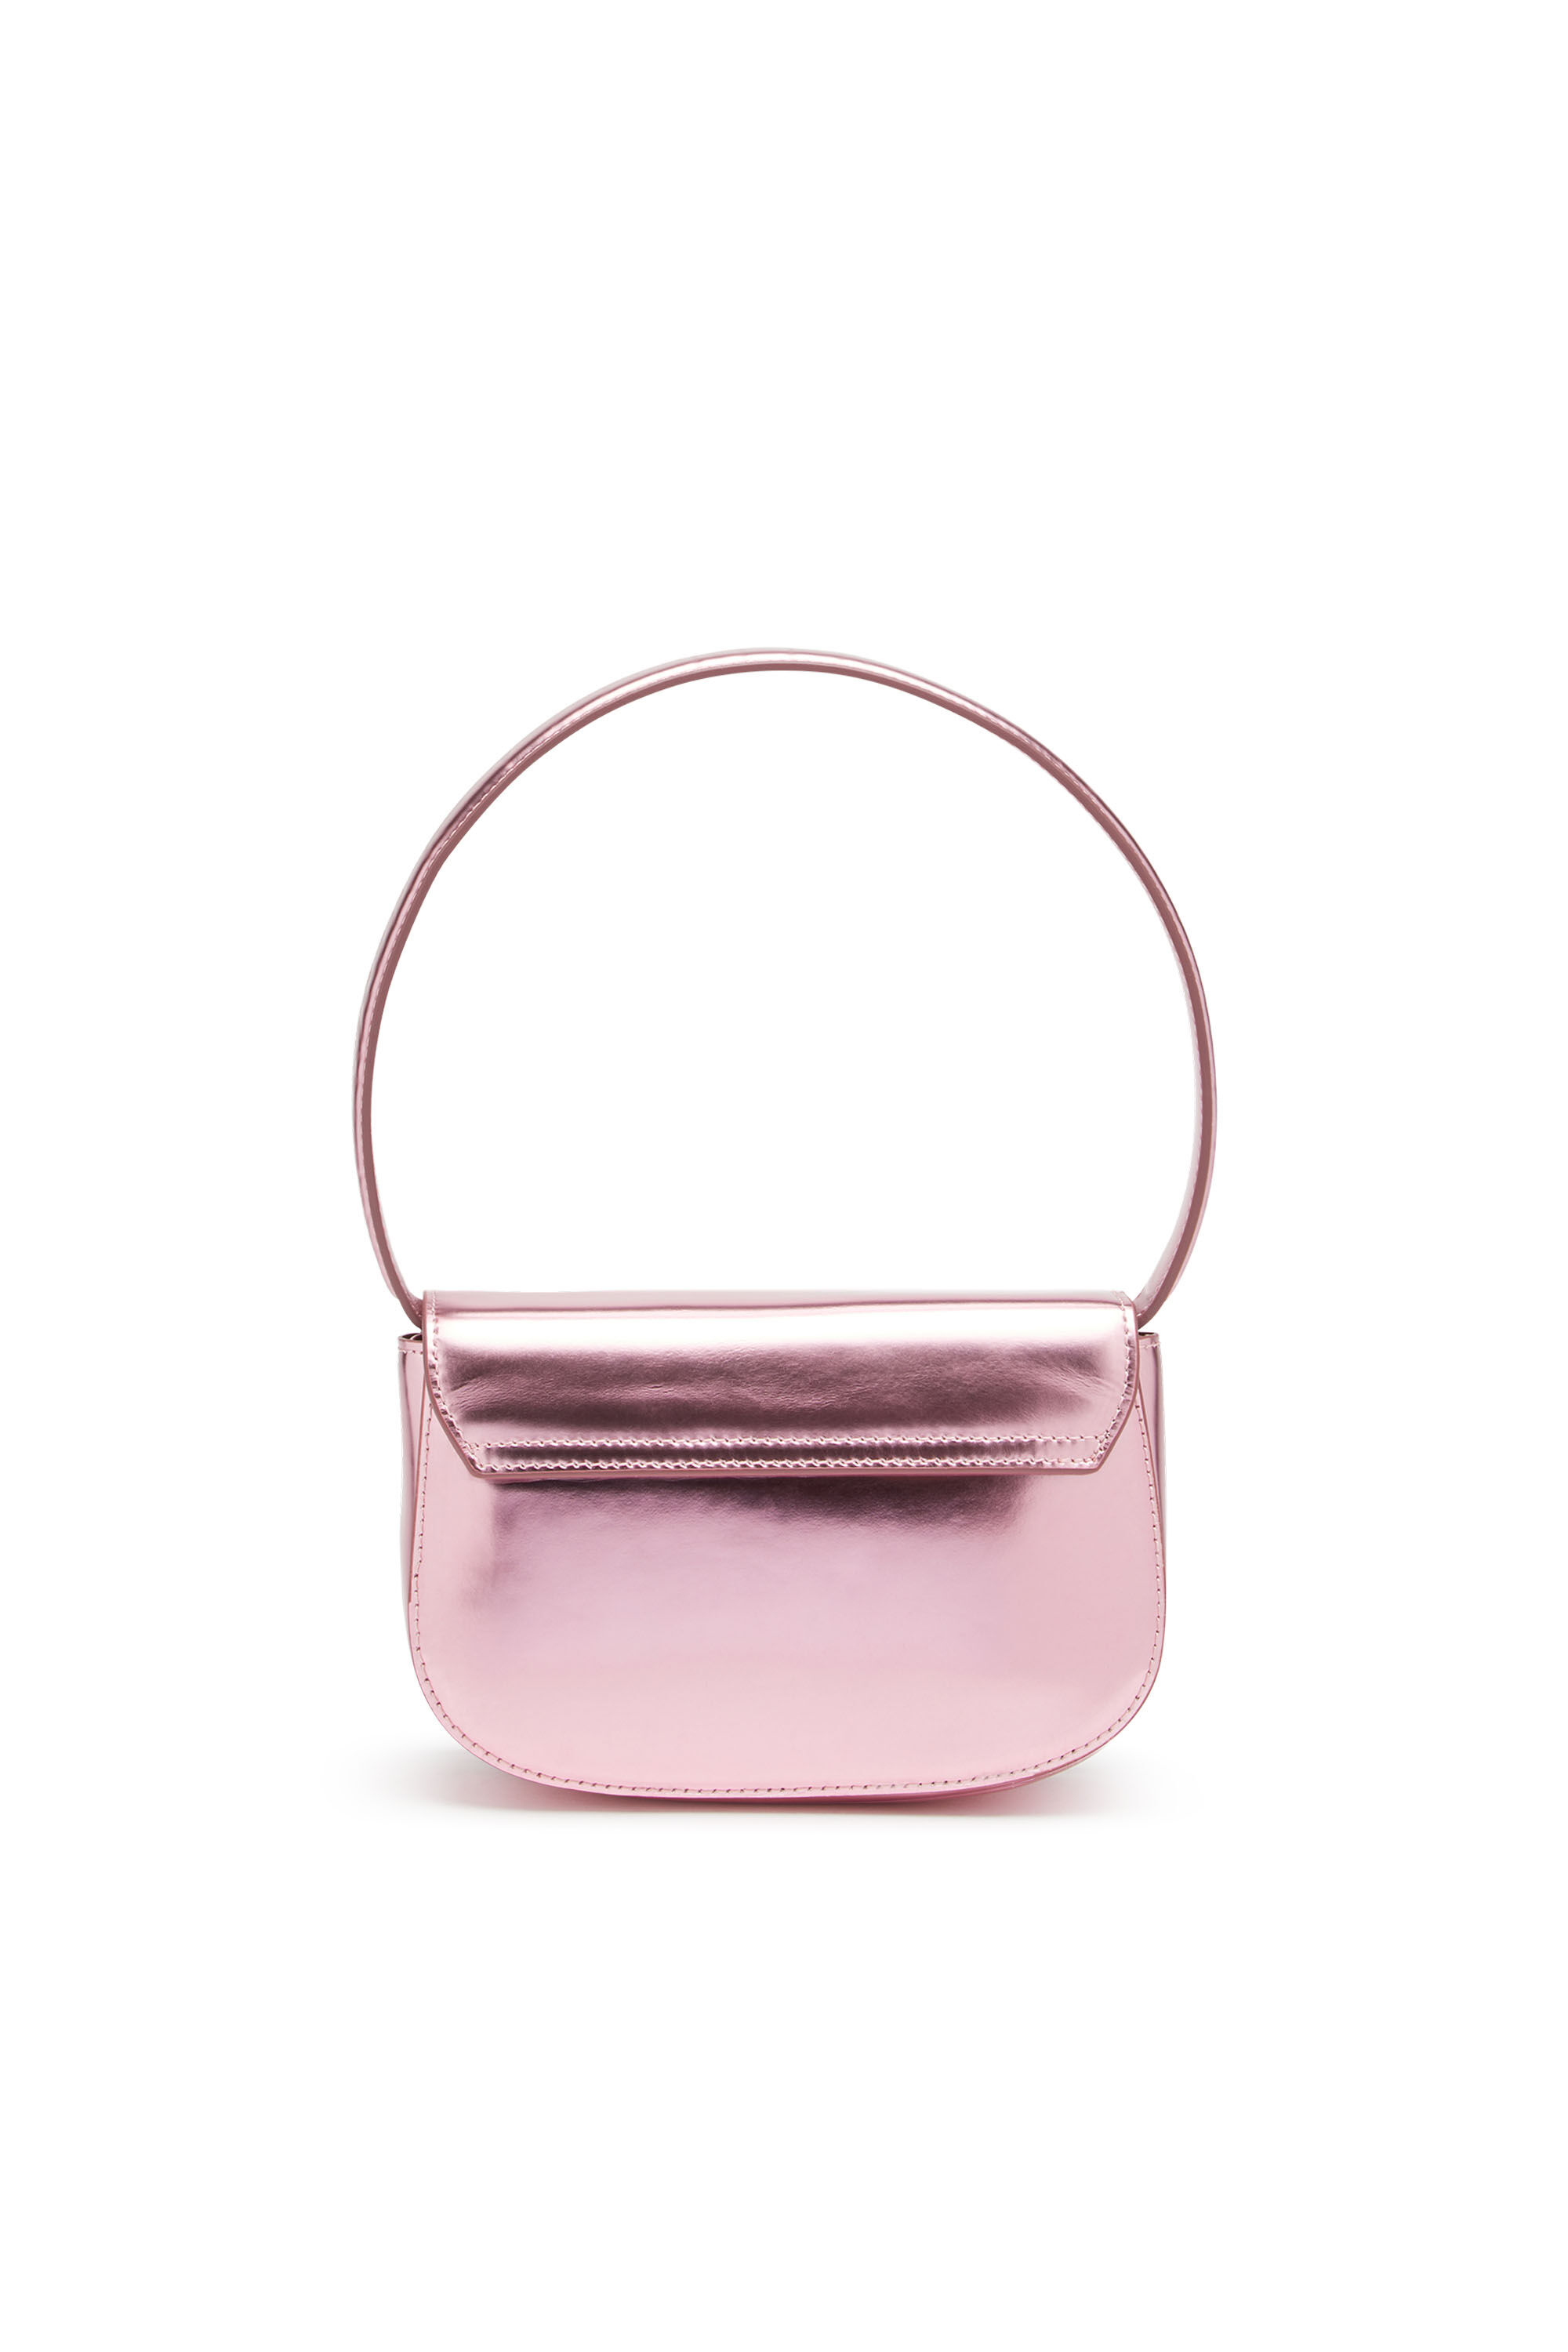 Diesel - 1DR, Woman 1DR-Iconic shoulder bag in mirrored leather in Pink - Image 3